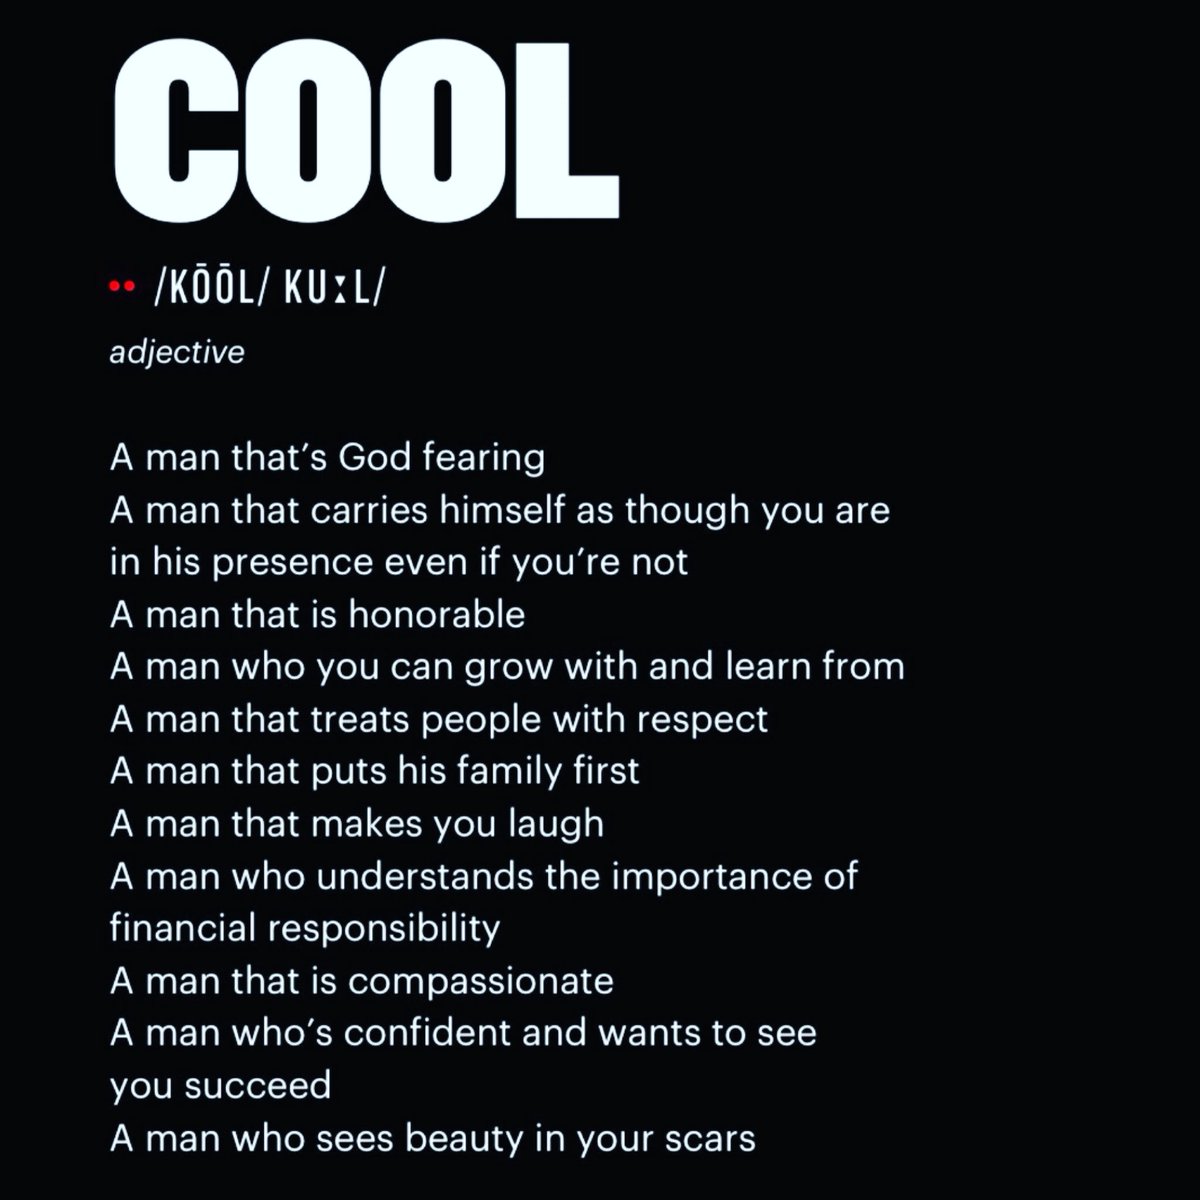 Cool is in the eye of the beholder. What are some qualities you see as COOL? #LevelUp https://t.co/e8wDWt03JJ